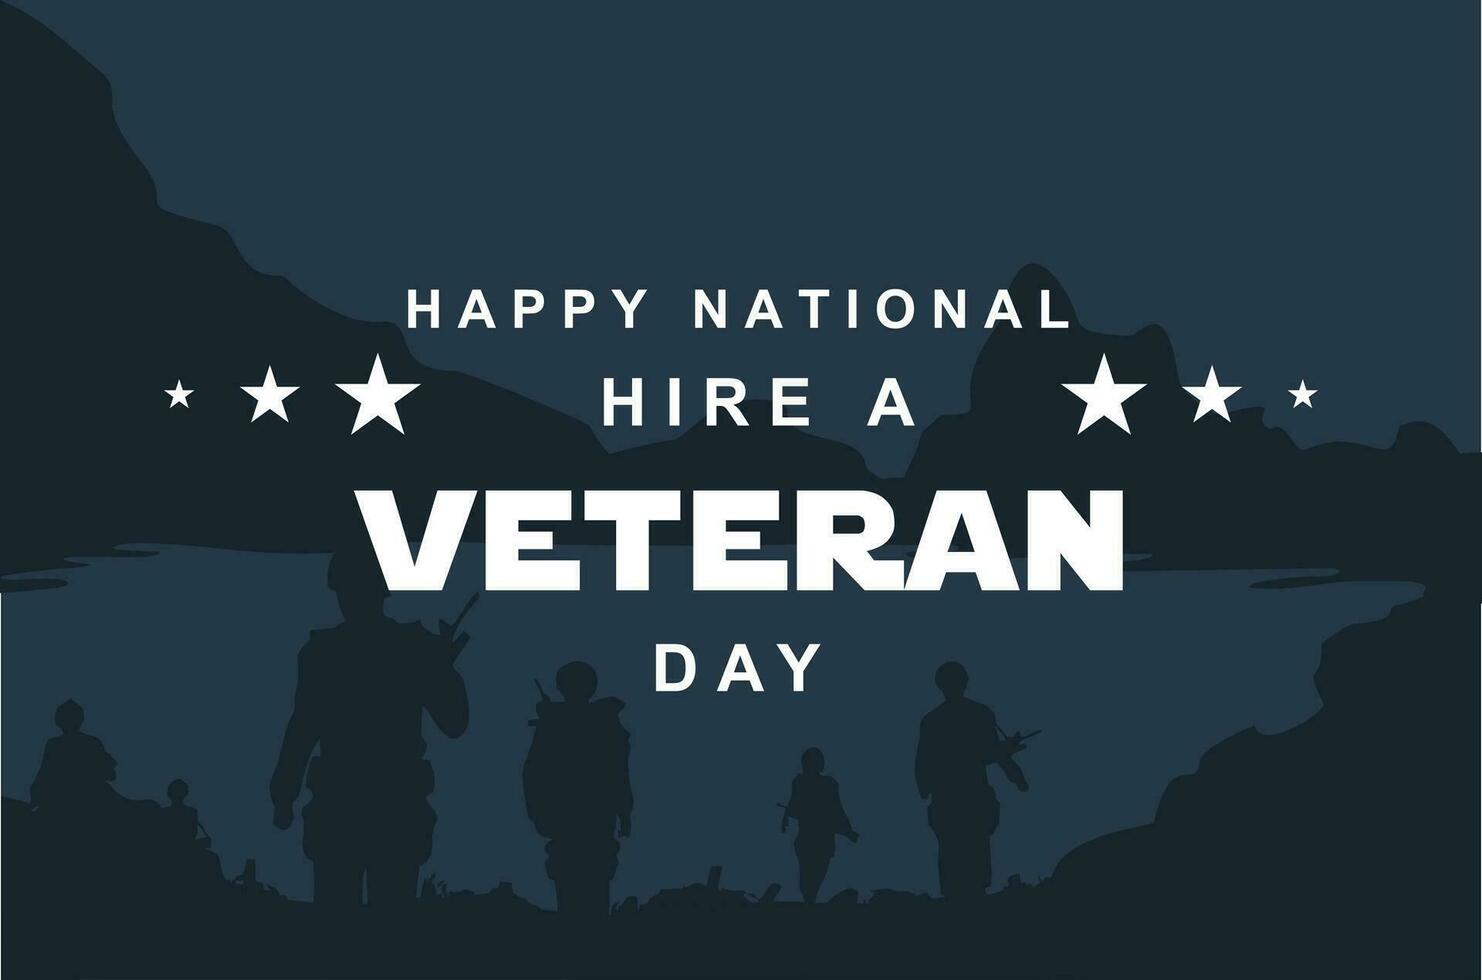 National Hire a Veteran Day vector